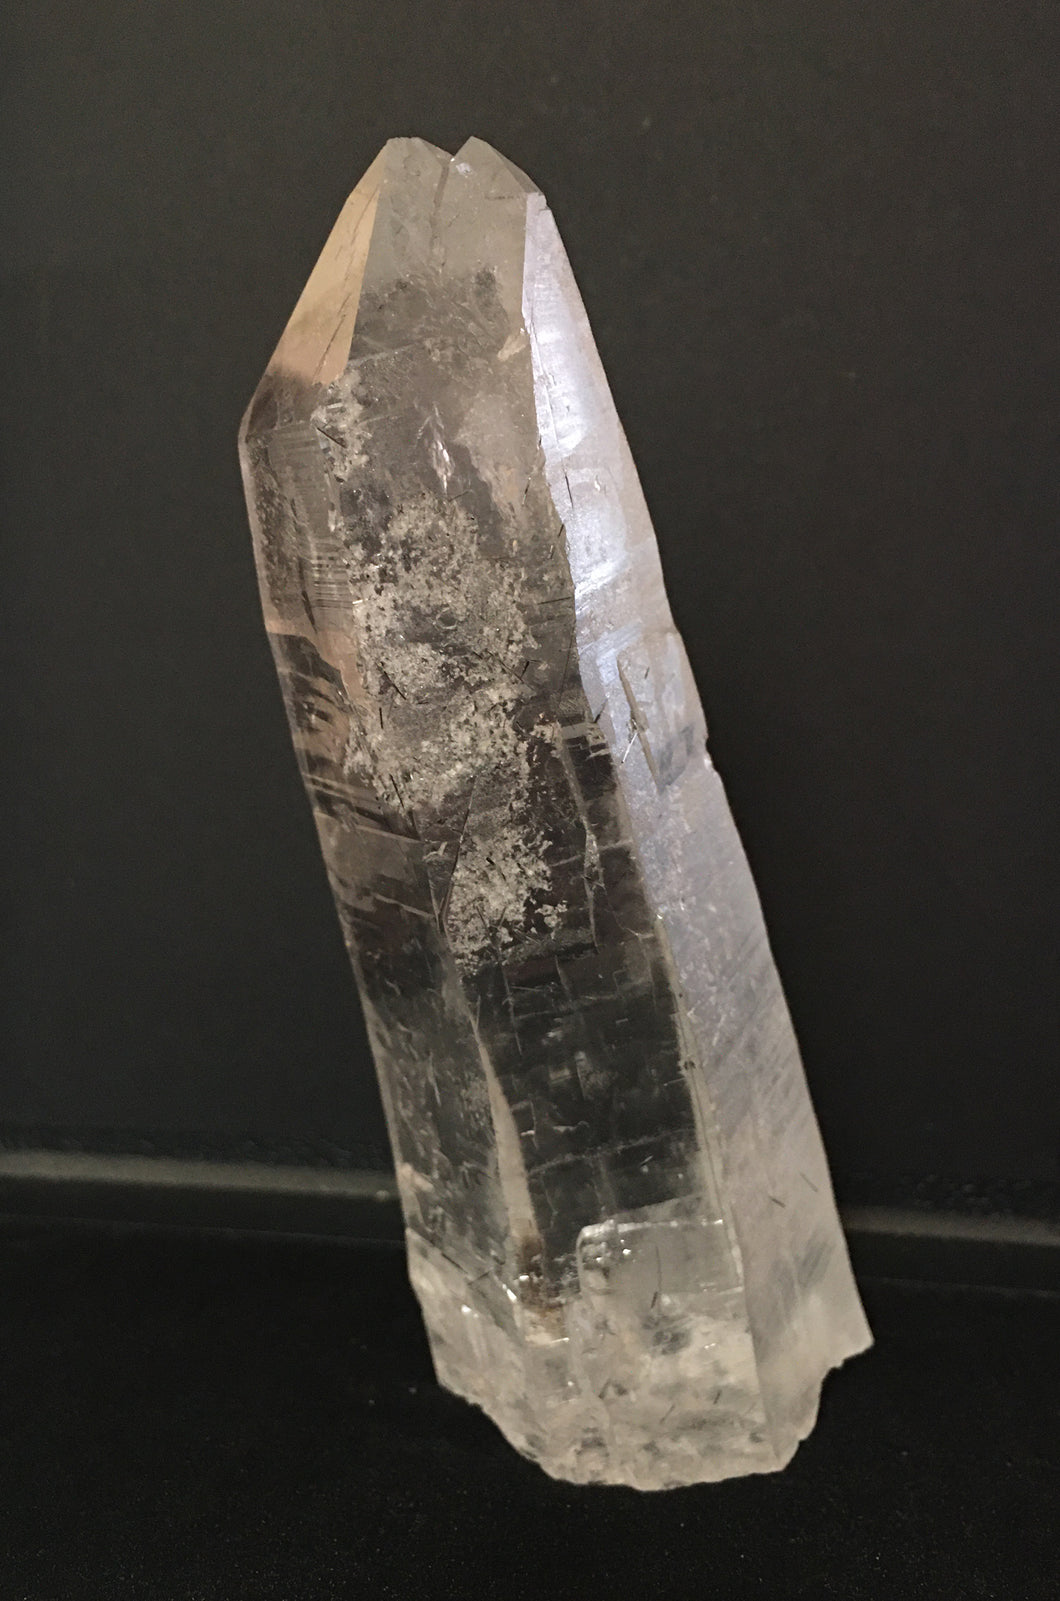 Lemurian Laser Wand for accessing sacred information with unusual threads of Black Tourmaline